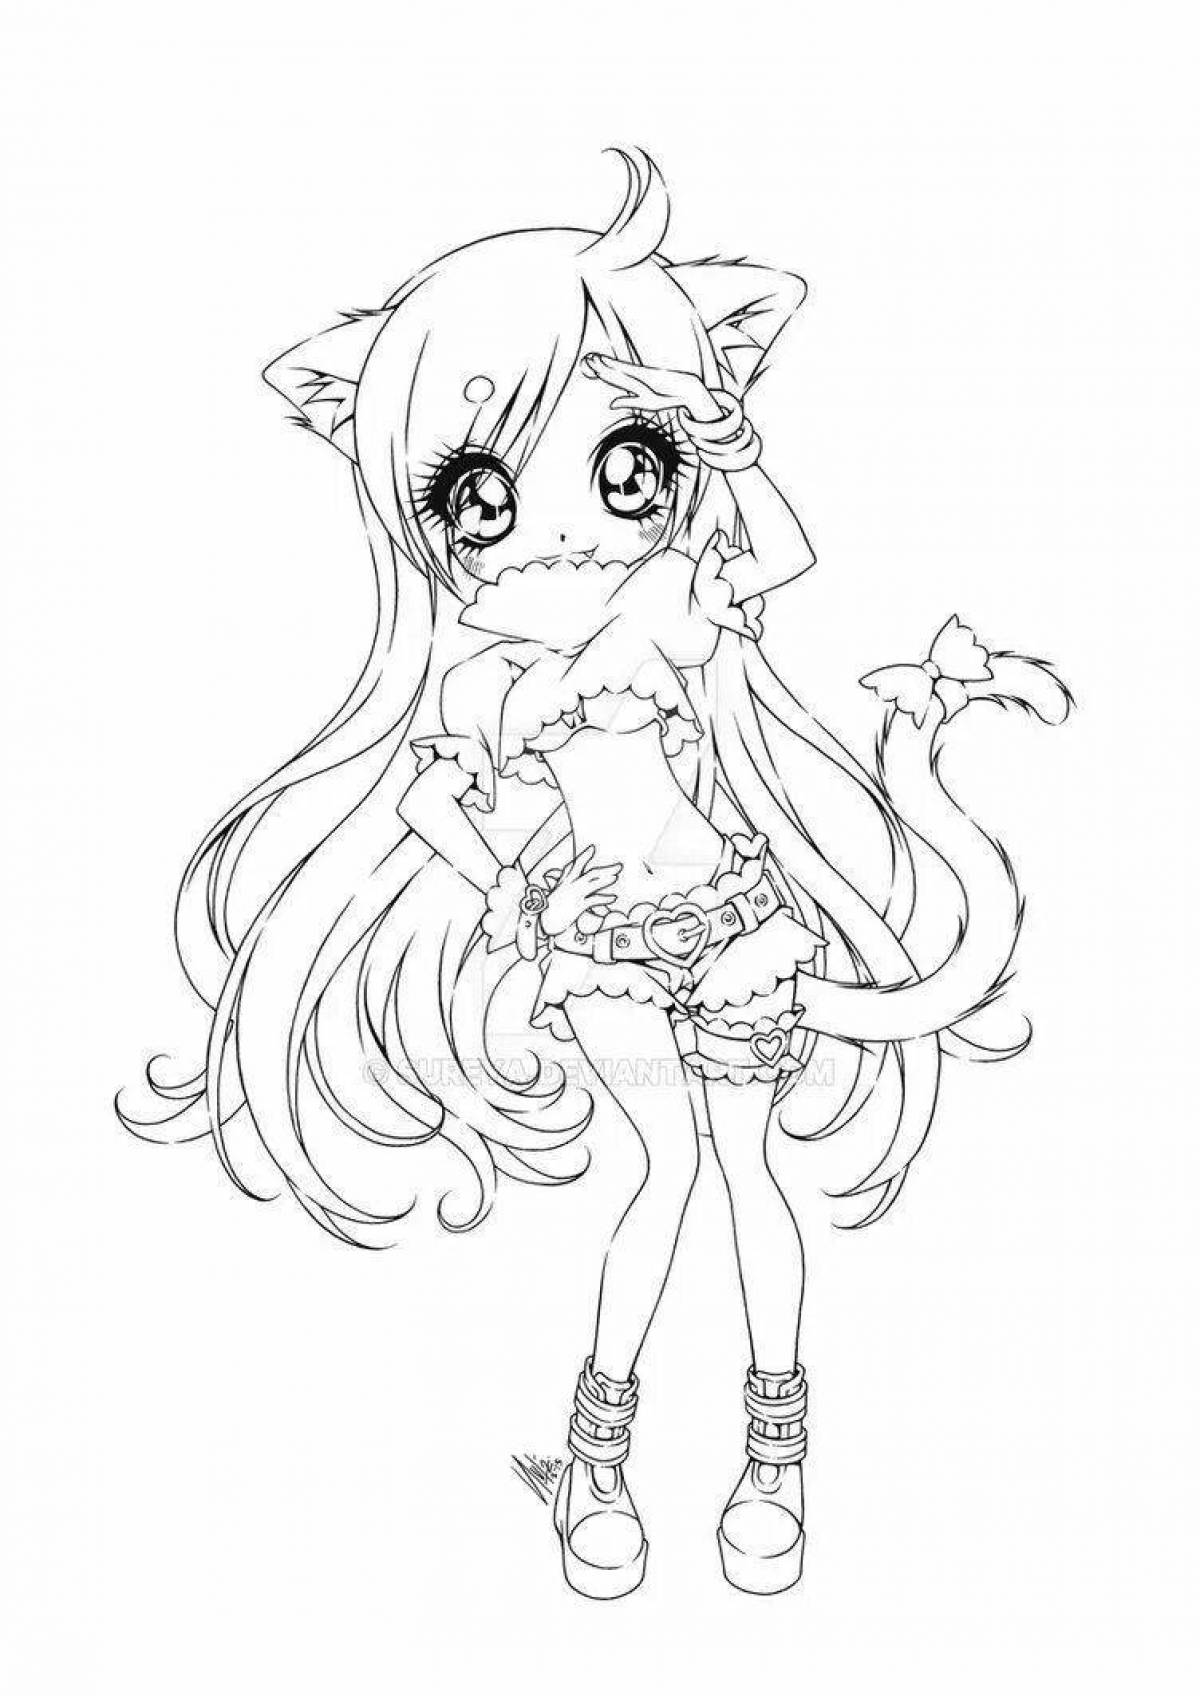 Funny anime animal coloring pages for girls